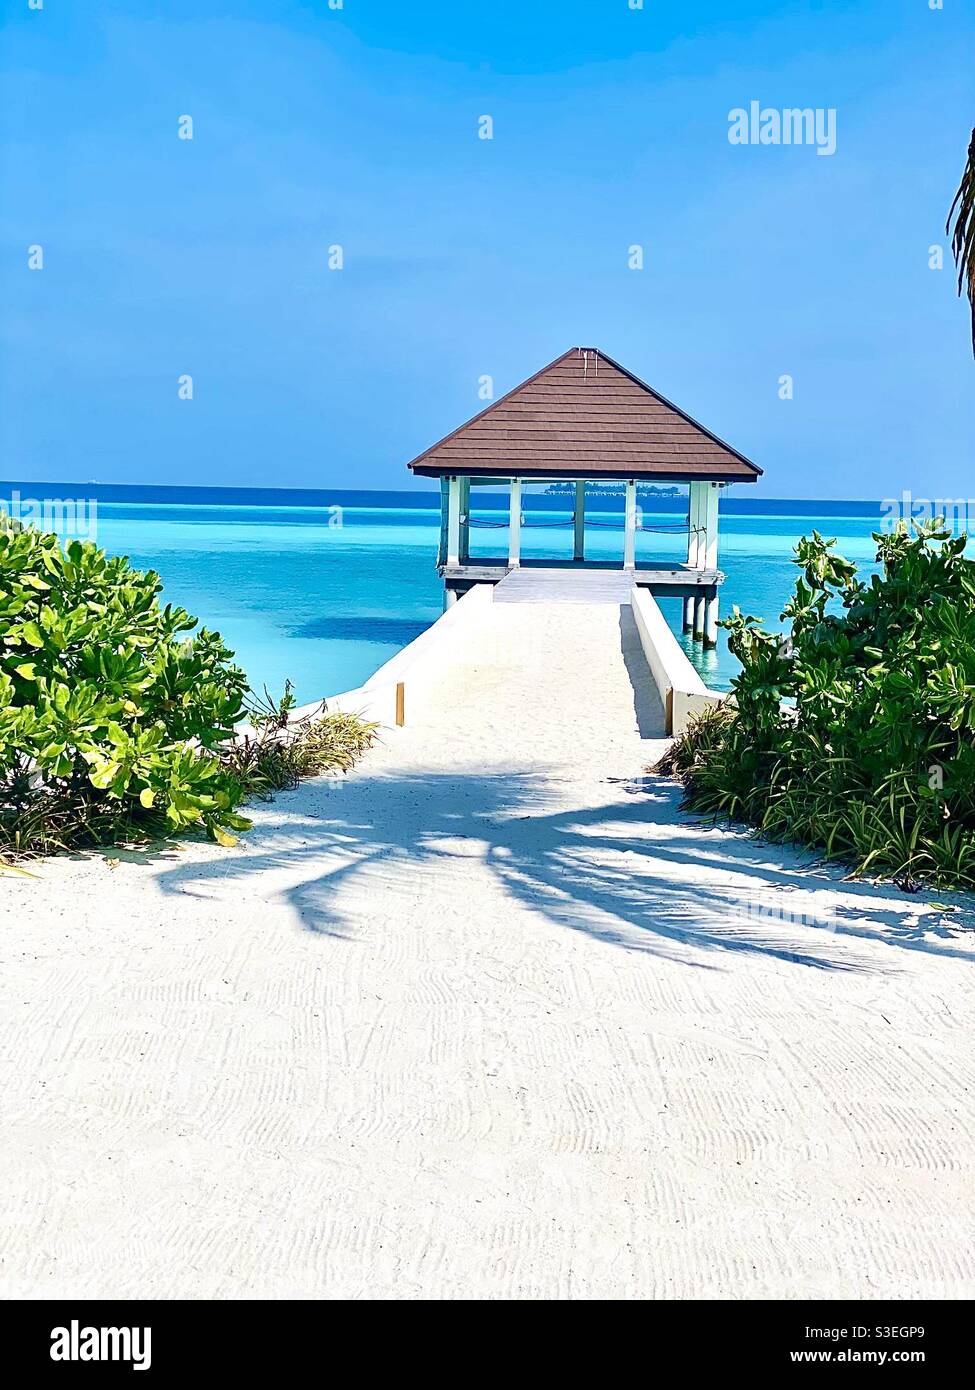 A small glass house or gazebo for watching sea at Maldives beach Stock  Photo - Alamy